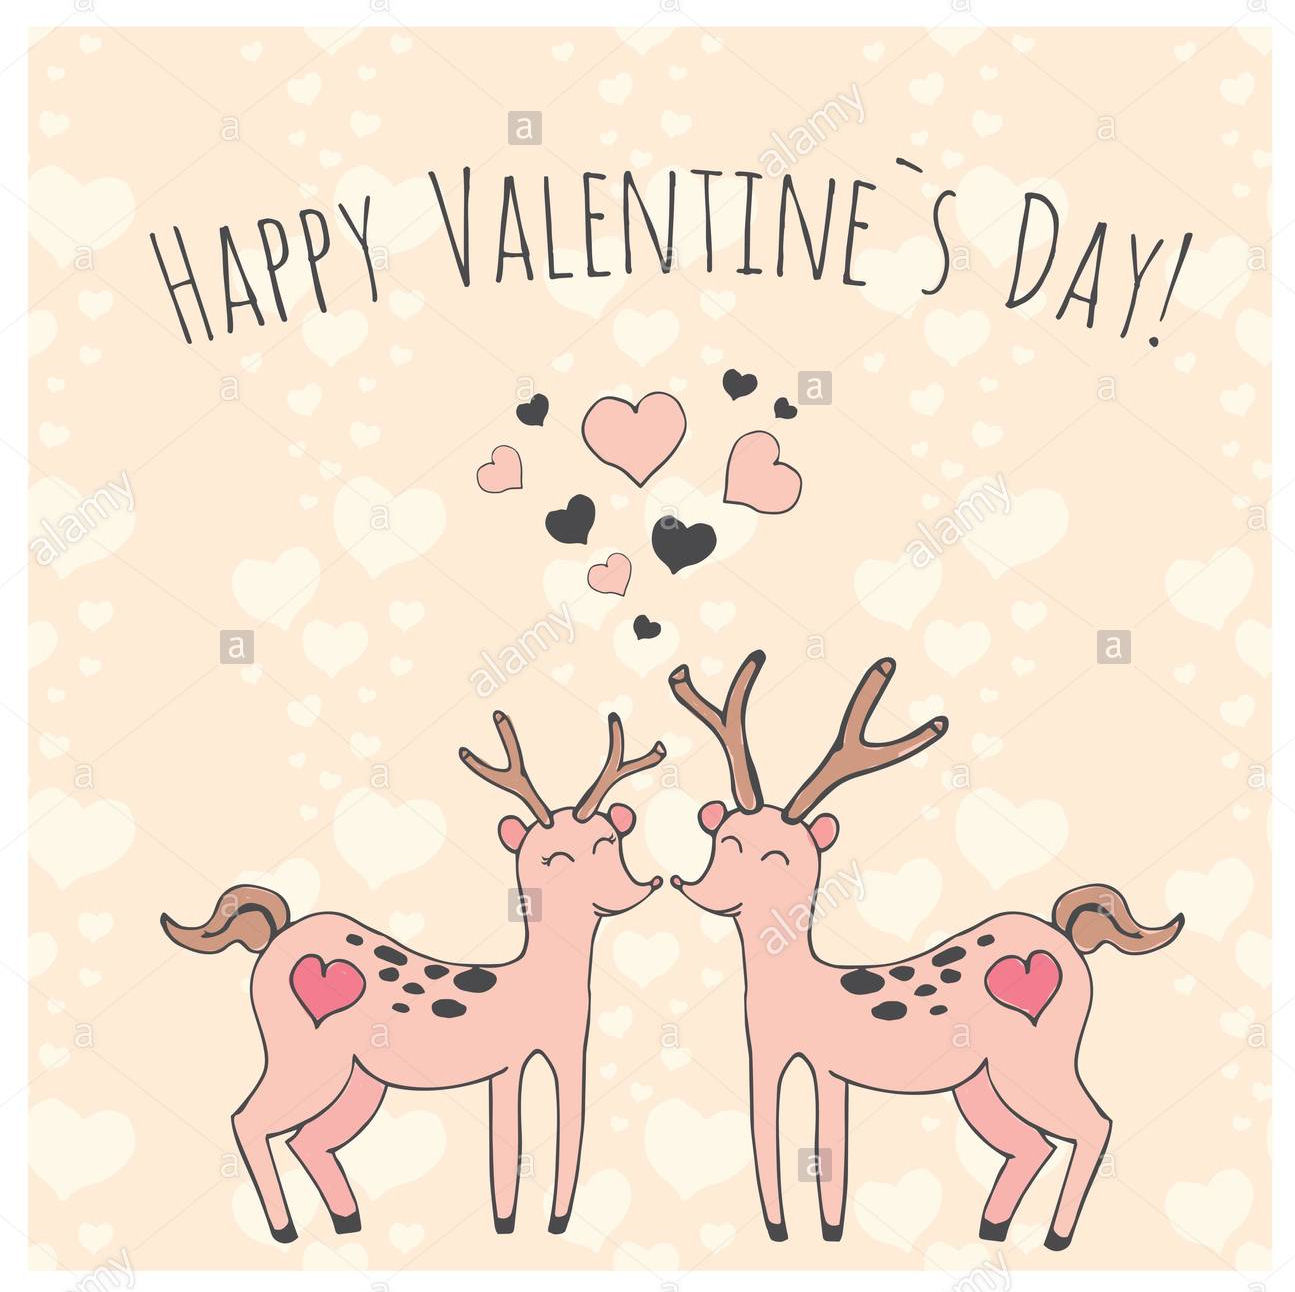 couple-of-deer-with-hearts-valentines-day-vector-illustration-P48YM7